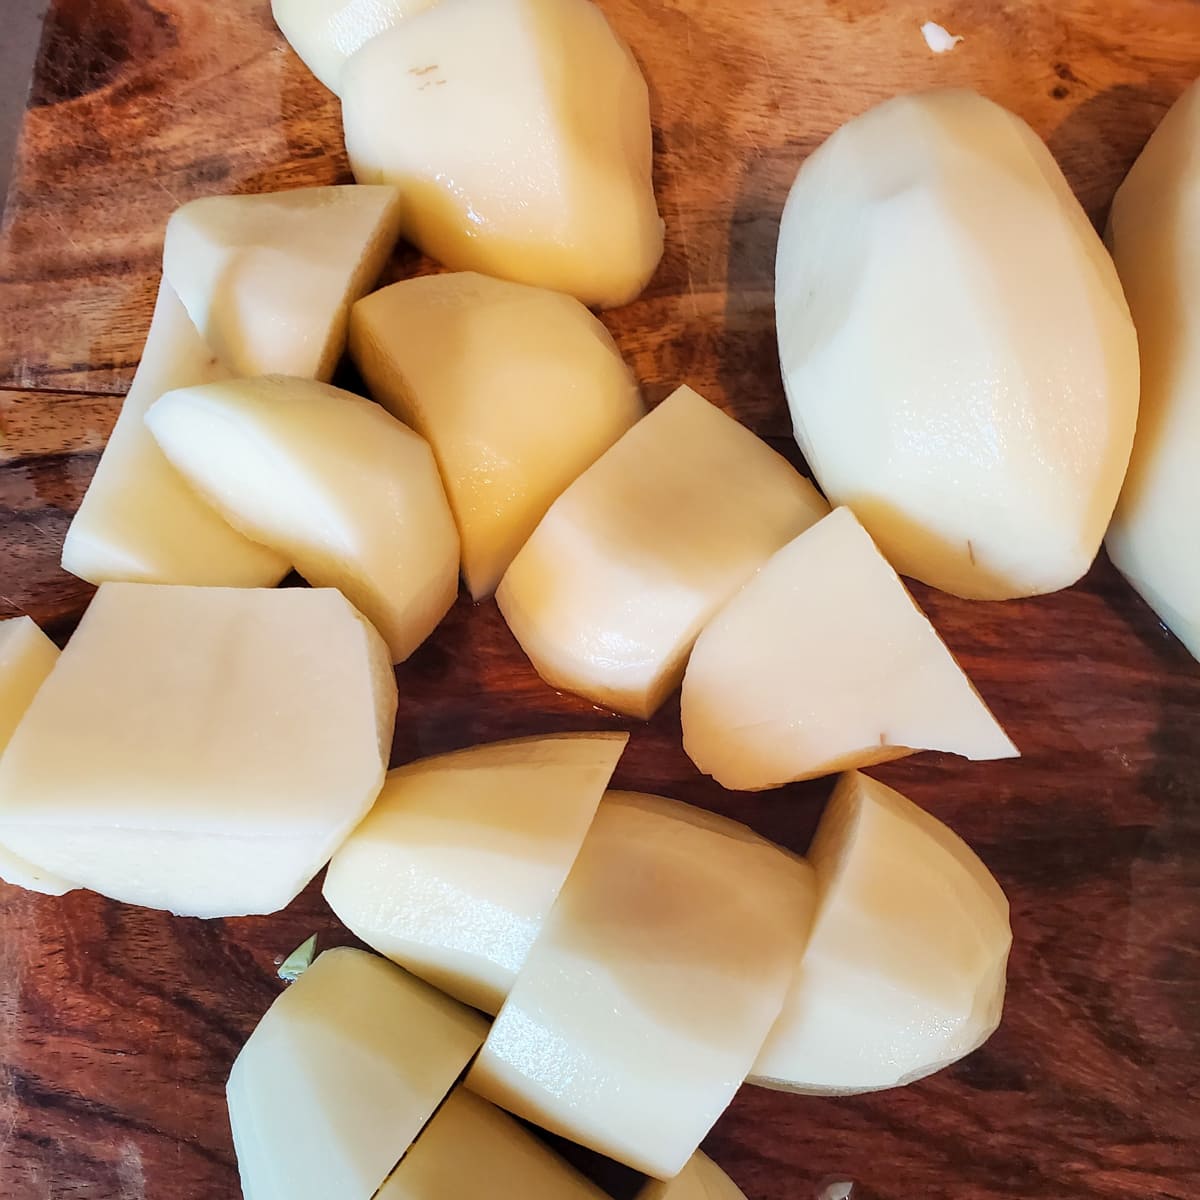 Peeled and cubed Russet potatoes on a cutting board.